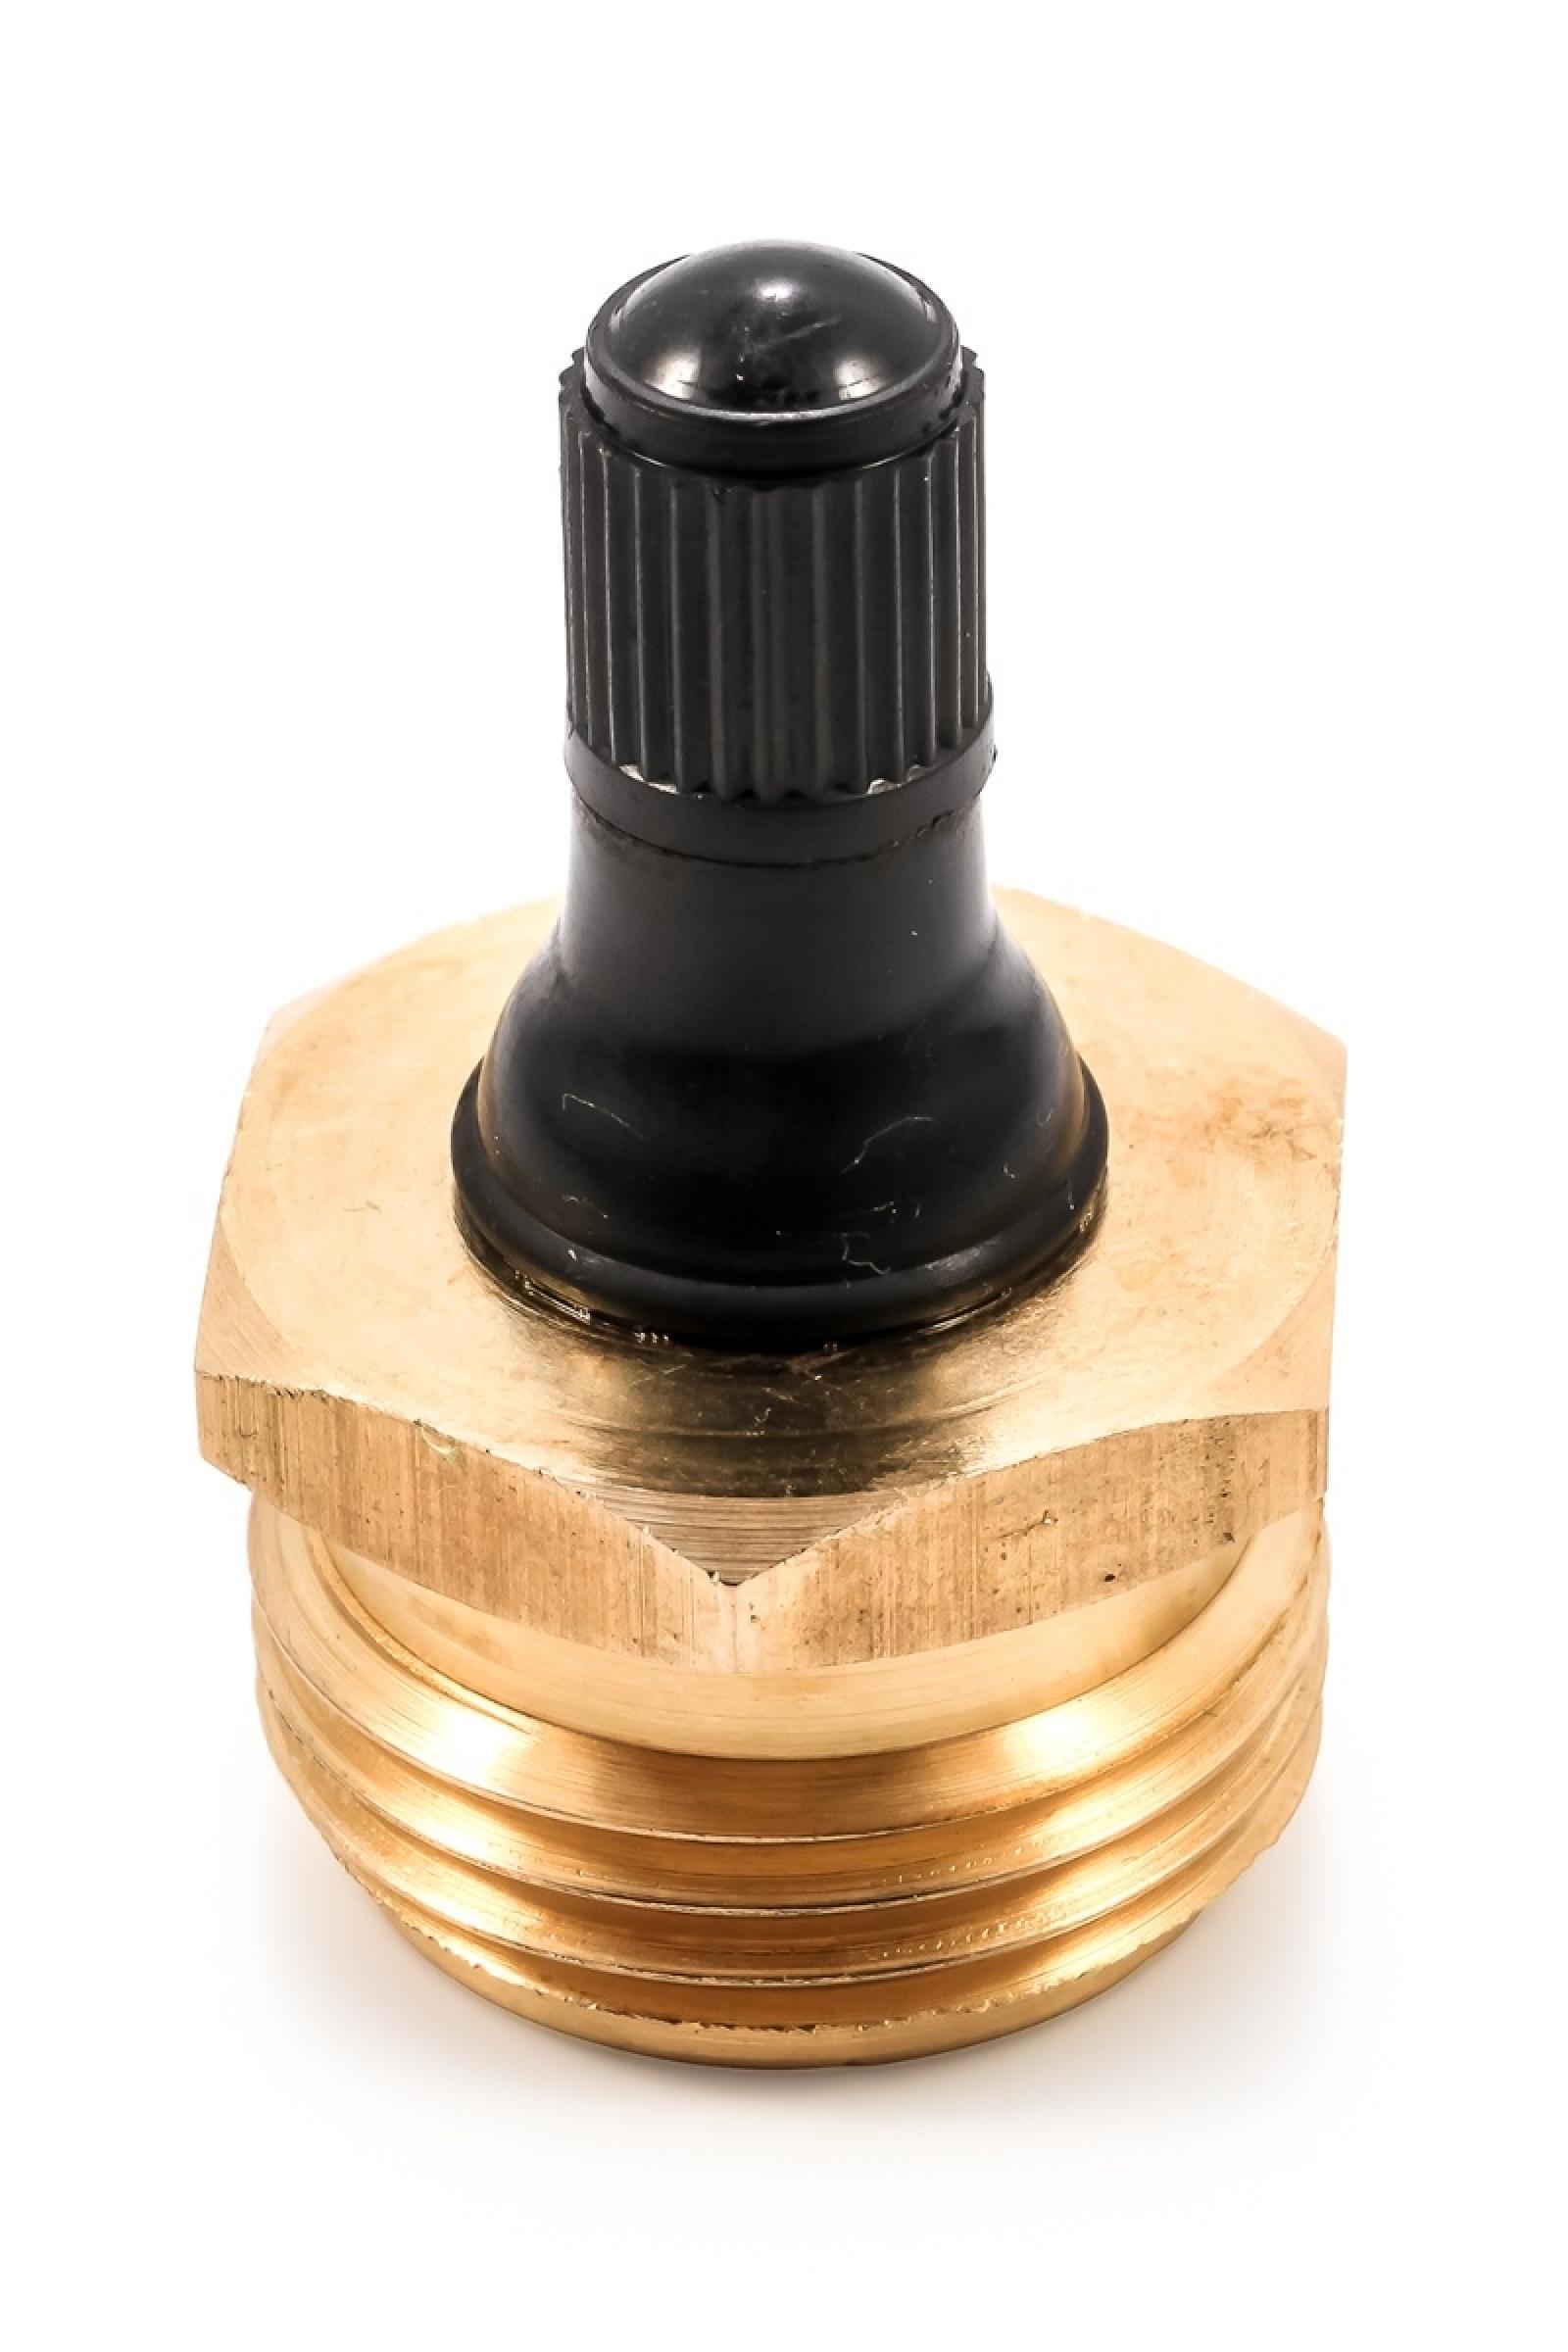 Camco Brass Blow Out Plug